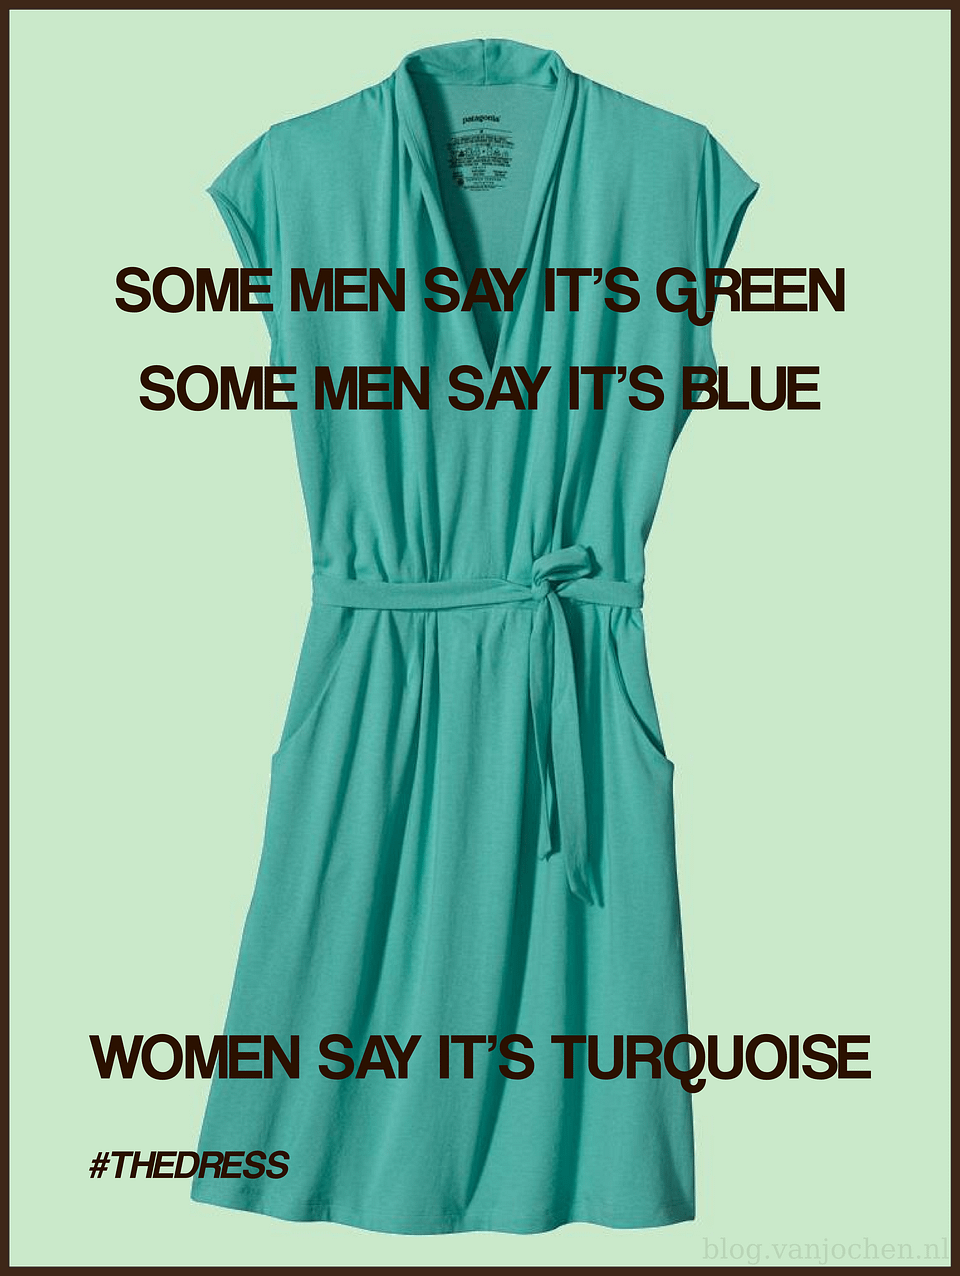 Some men say it's green. Some men say it's blue. Women say it's turquoise. #thedress